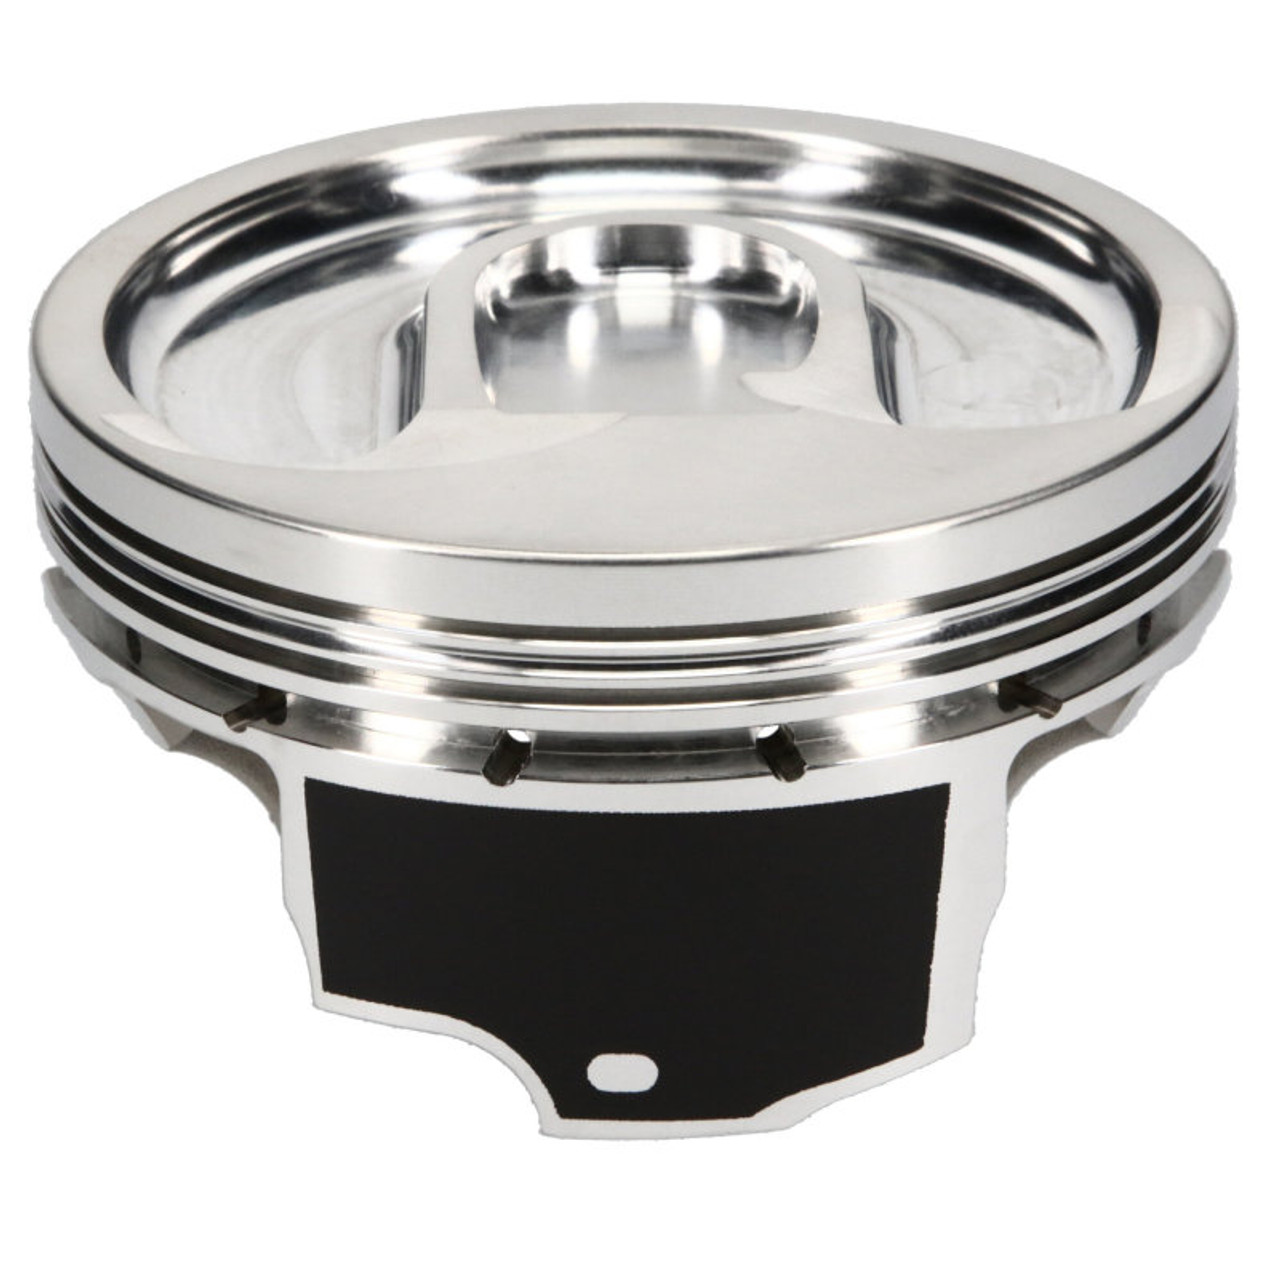 JE Pistons Chevrolet LT4 Gen V 4.065 Bore 0.927 Pin -1.295CD Inv Dome/Dish Pistons - Set of 8 - 353911 Photo - out of package